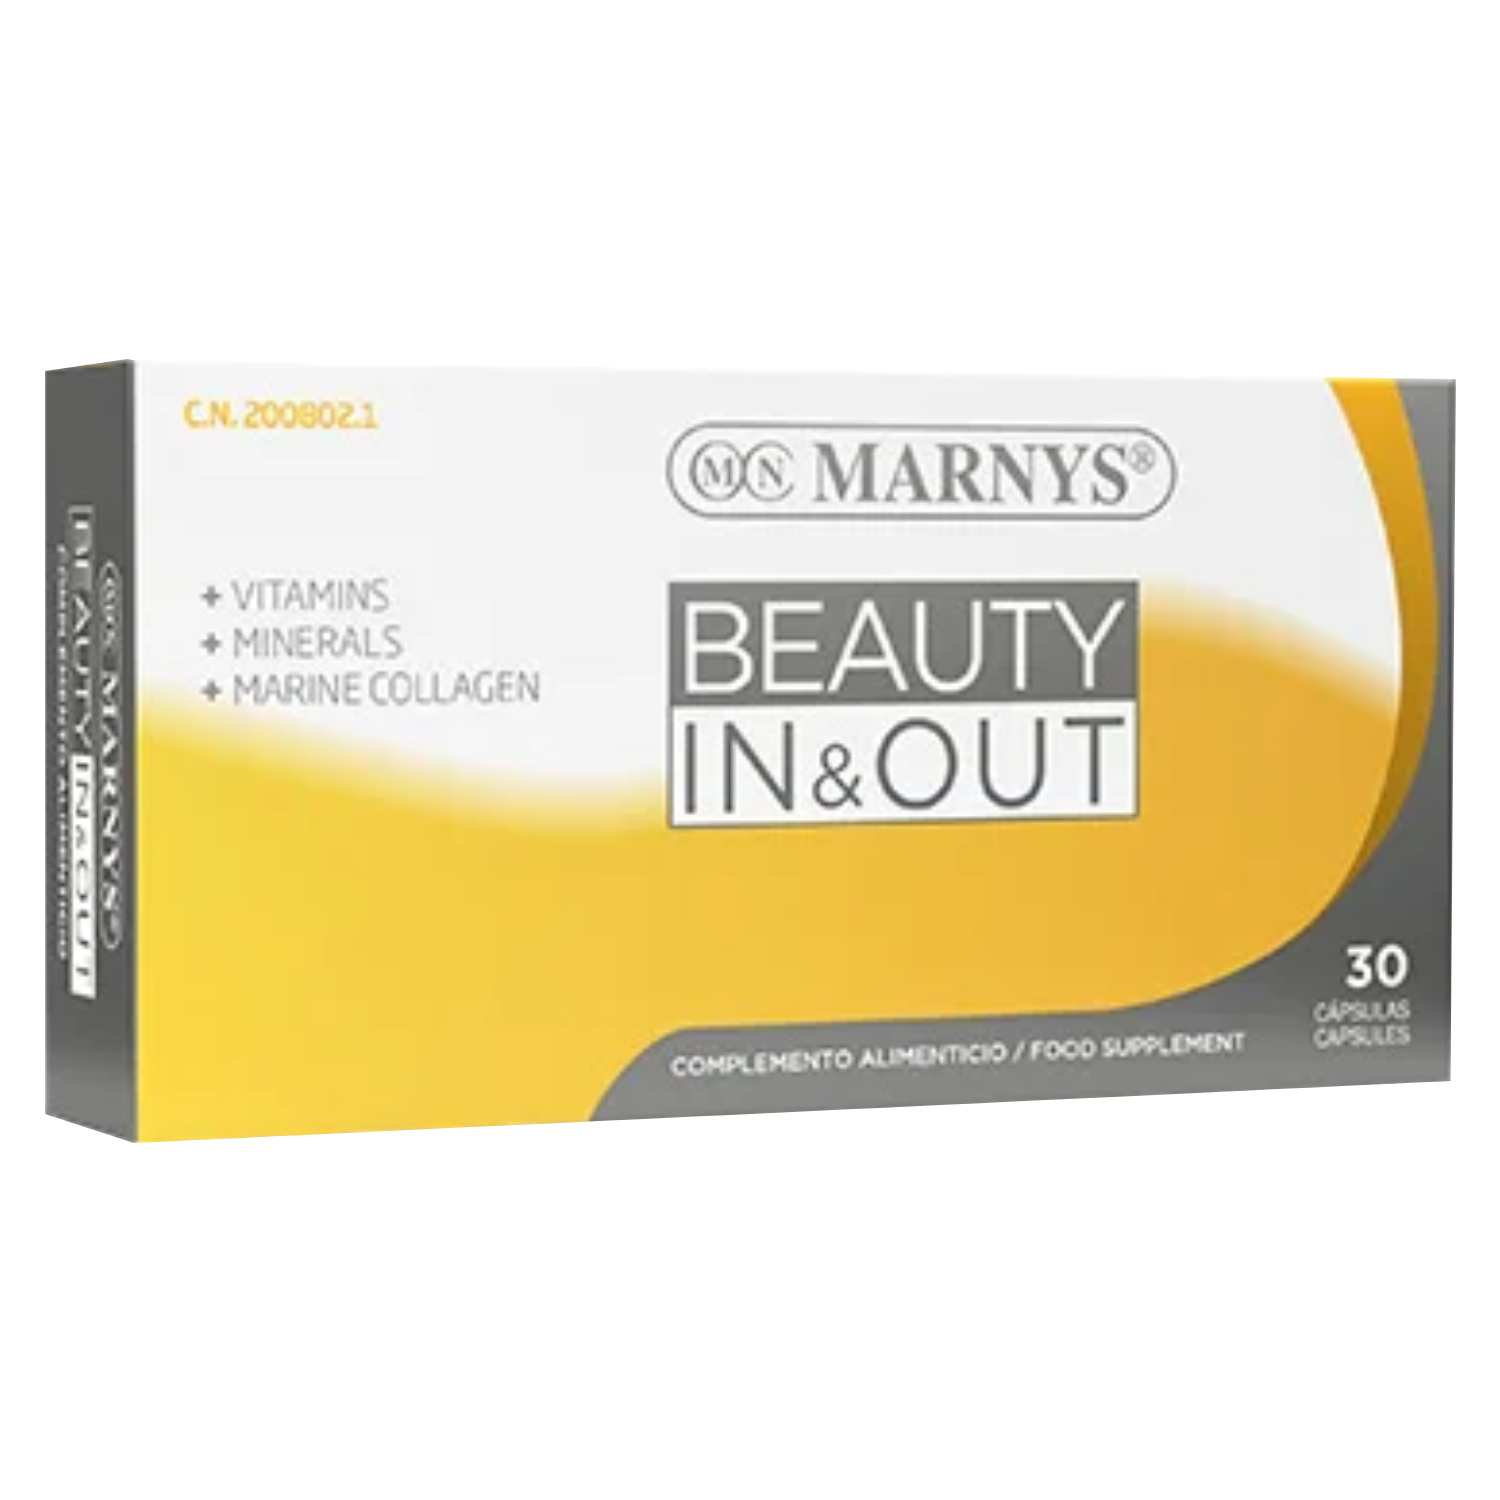 Back Image for Marnys Beauty in & Out Capsules 30's